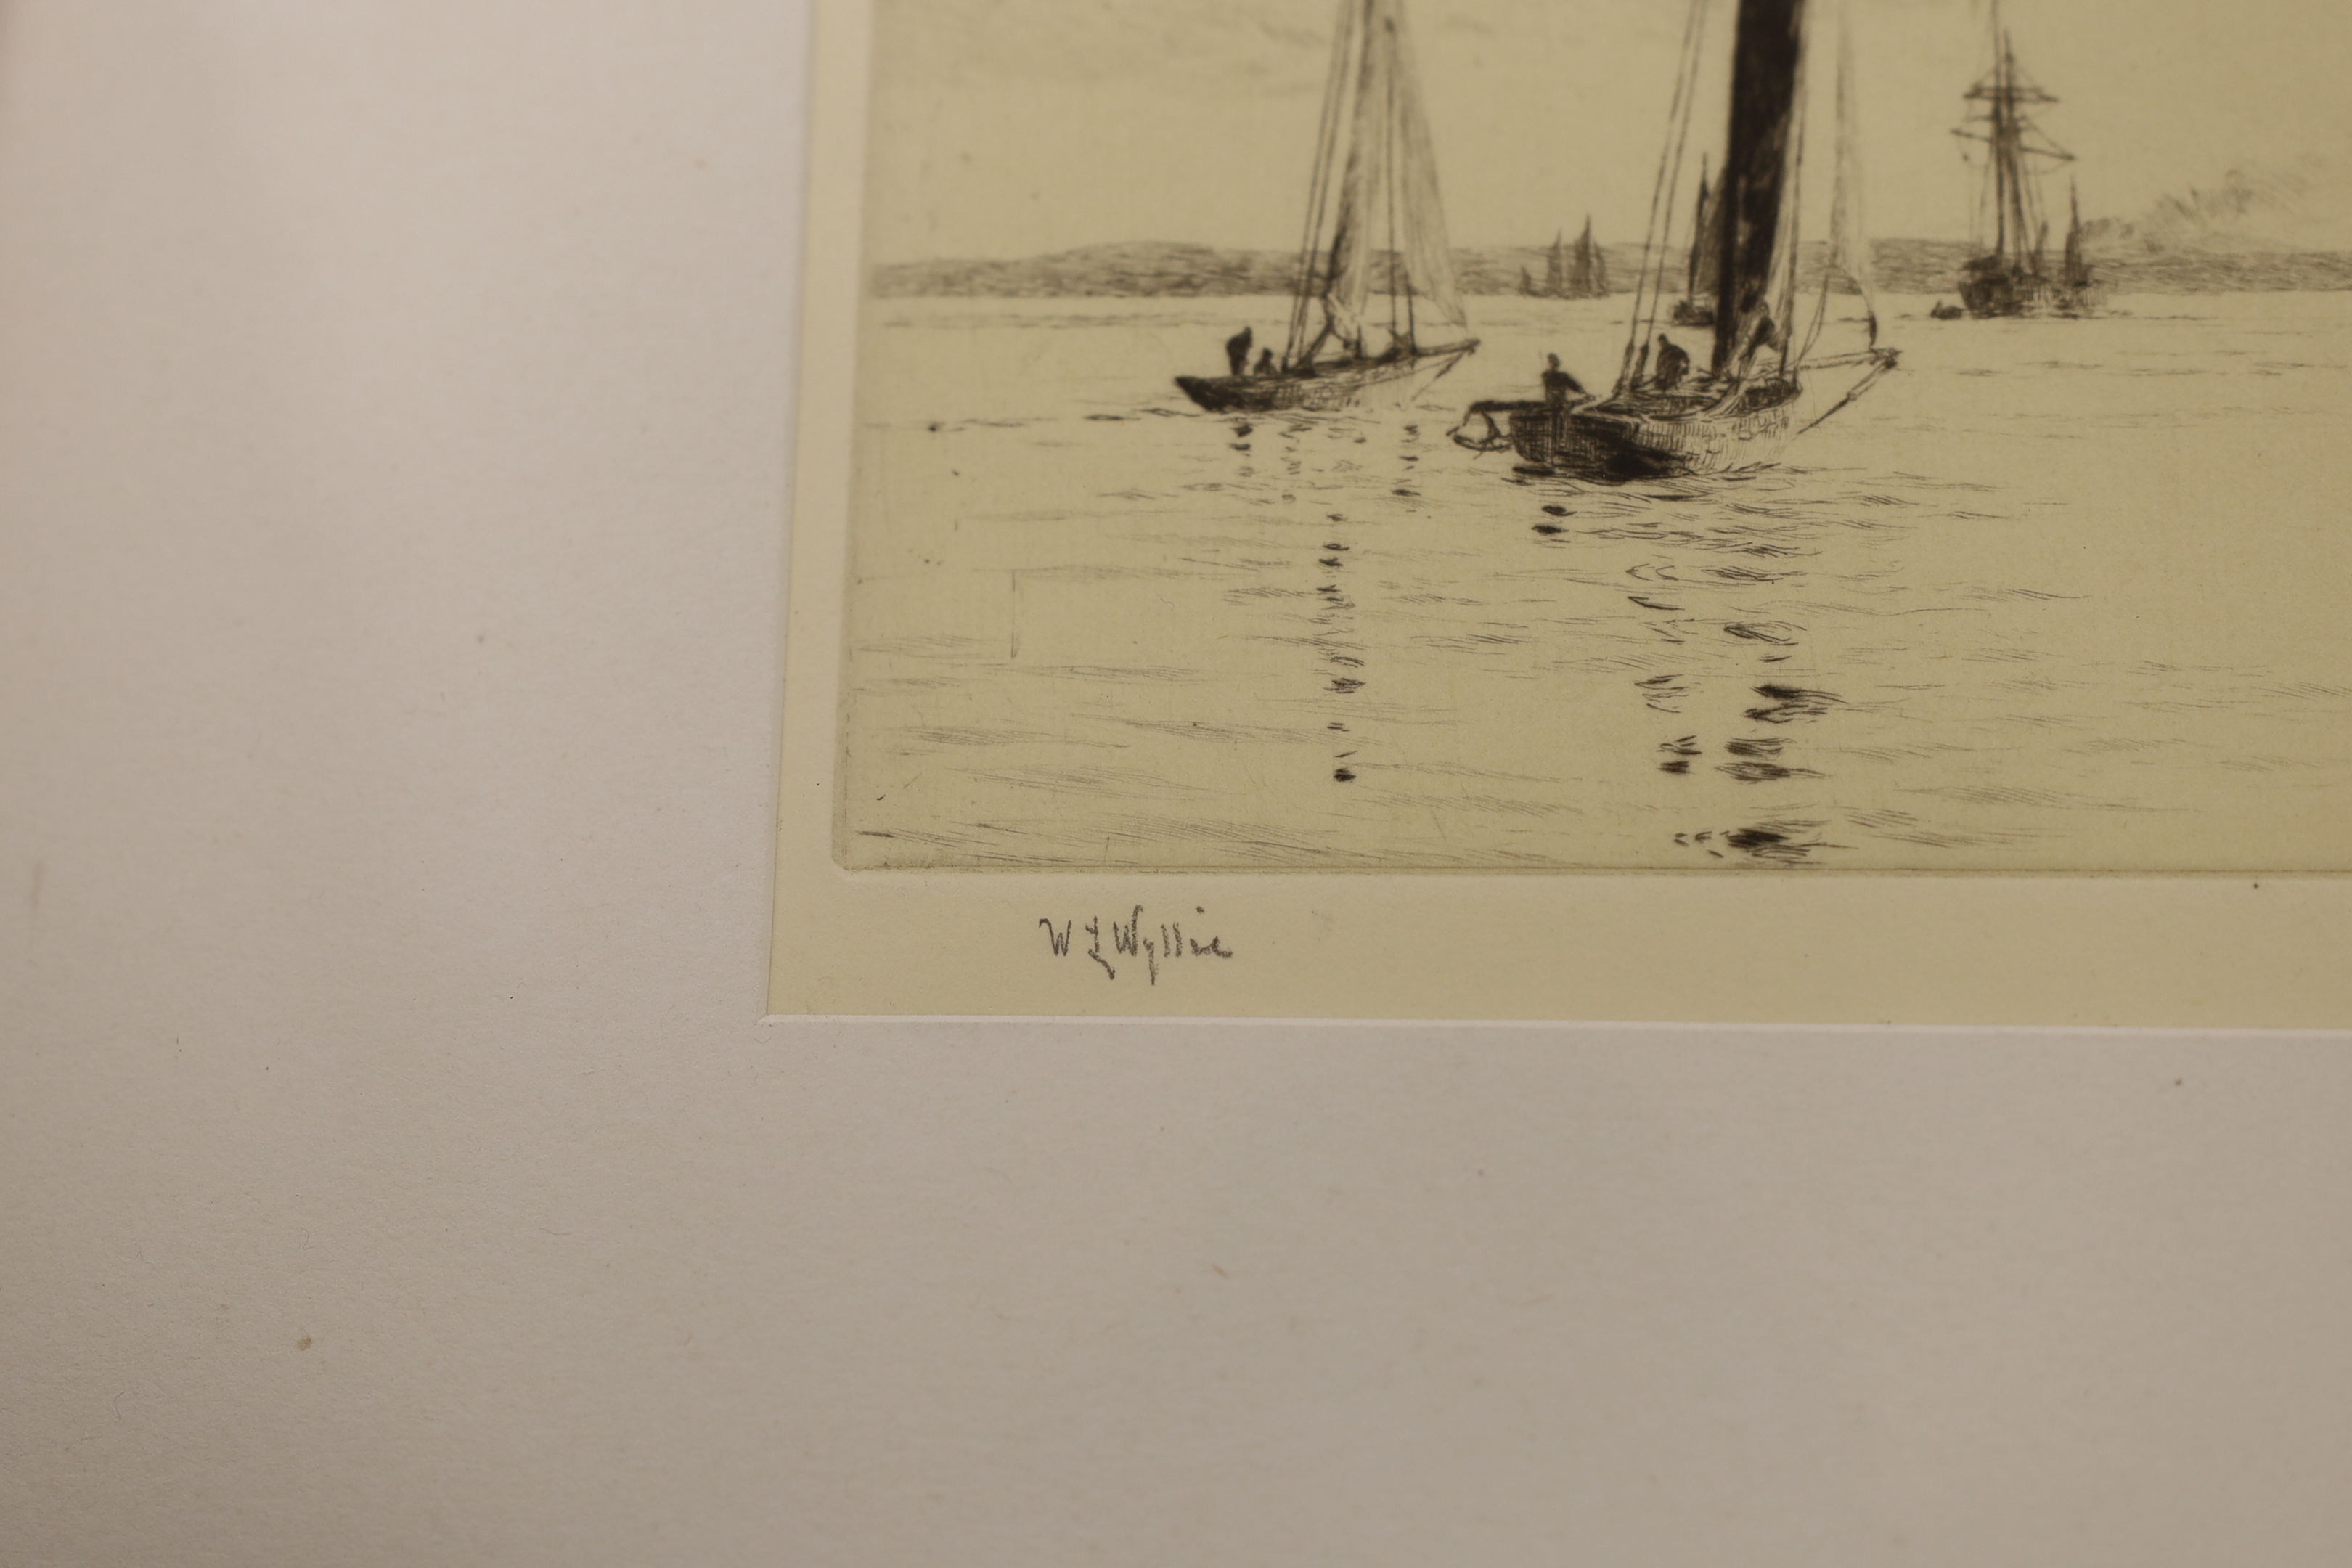 William Lionel Wyllie (1851-1931), etching, Sailing boats off the coast, signed in pencil, 14 x 17.5cm